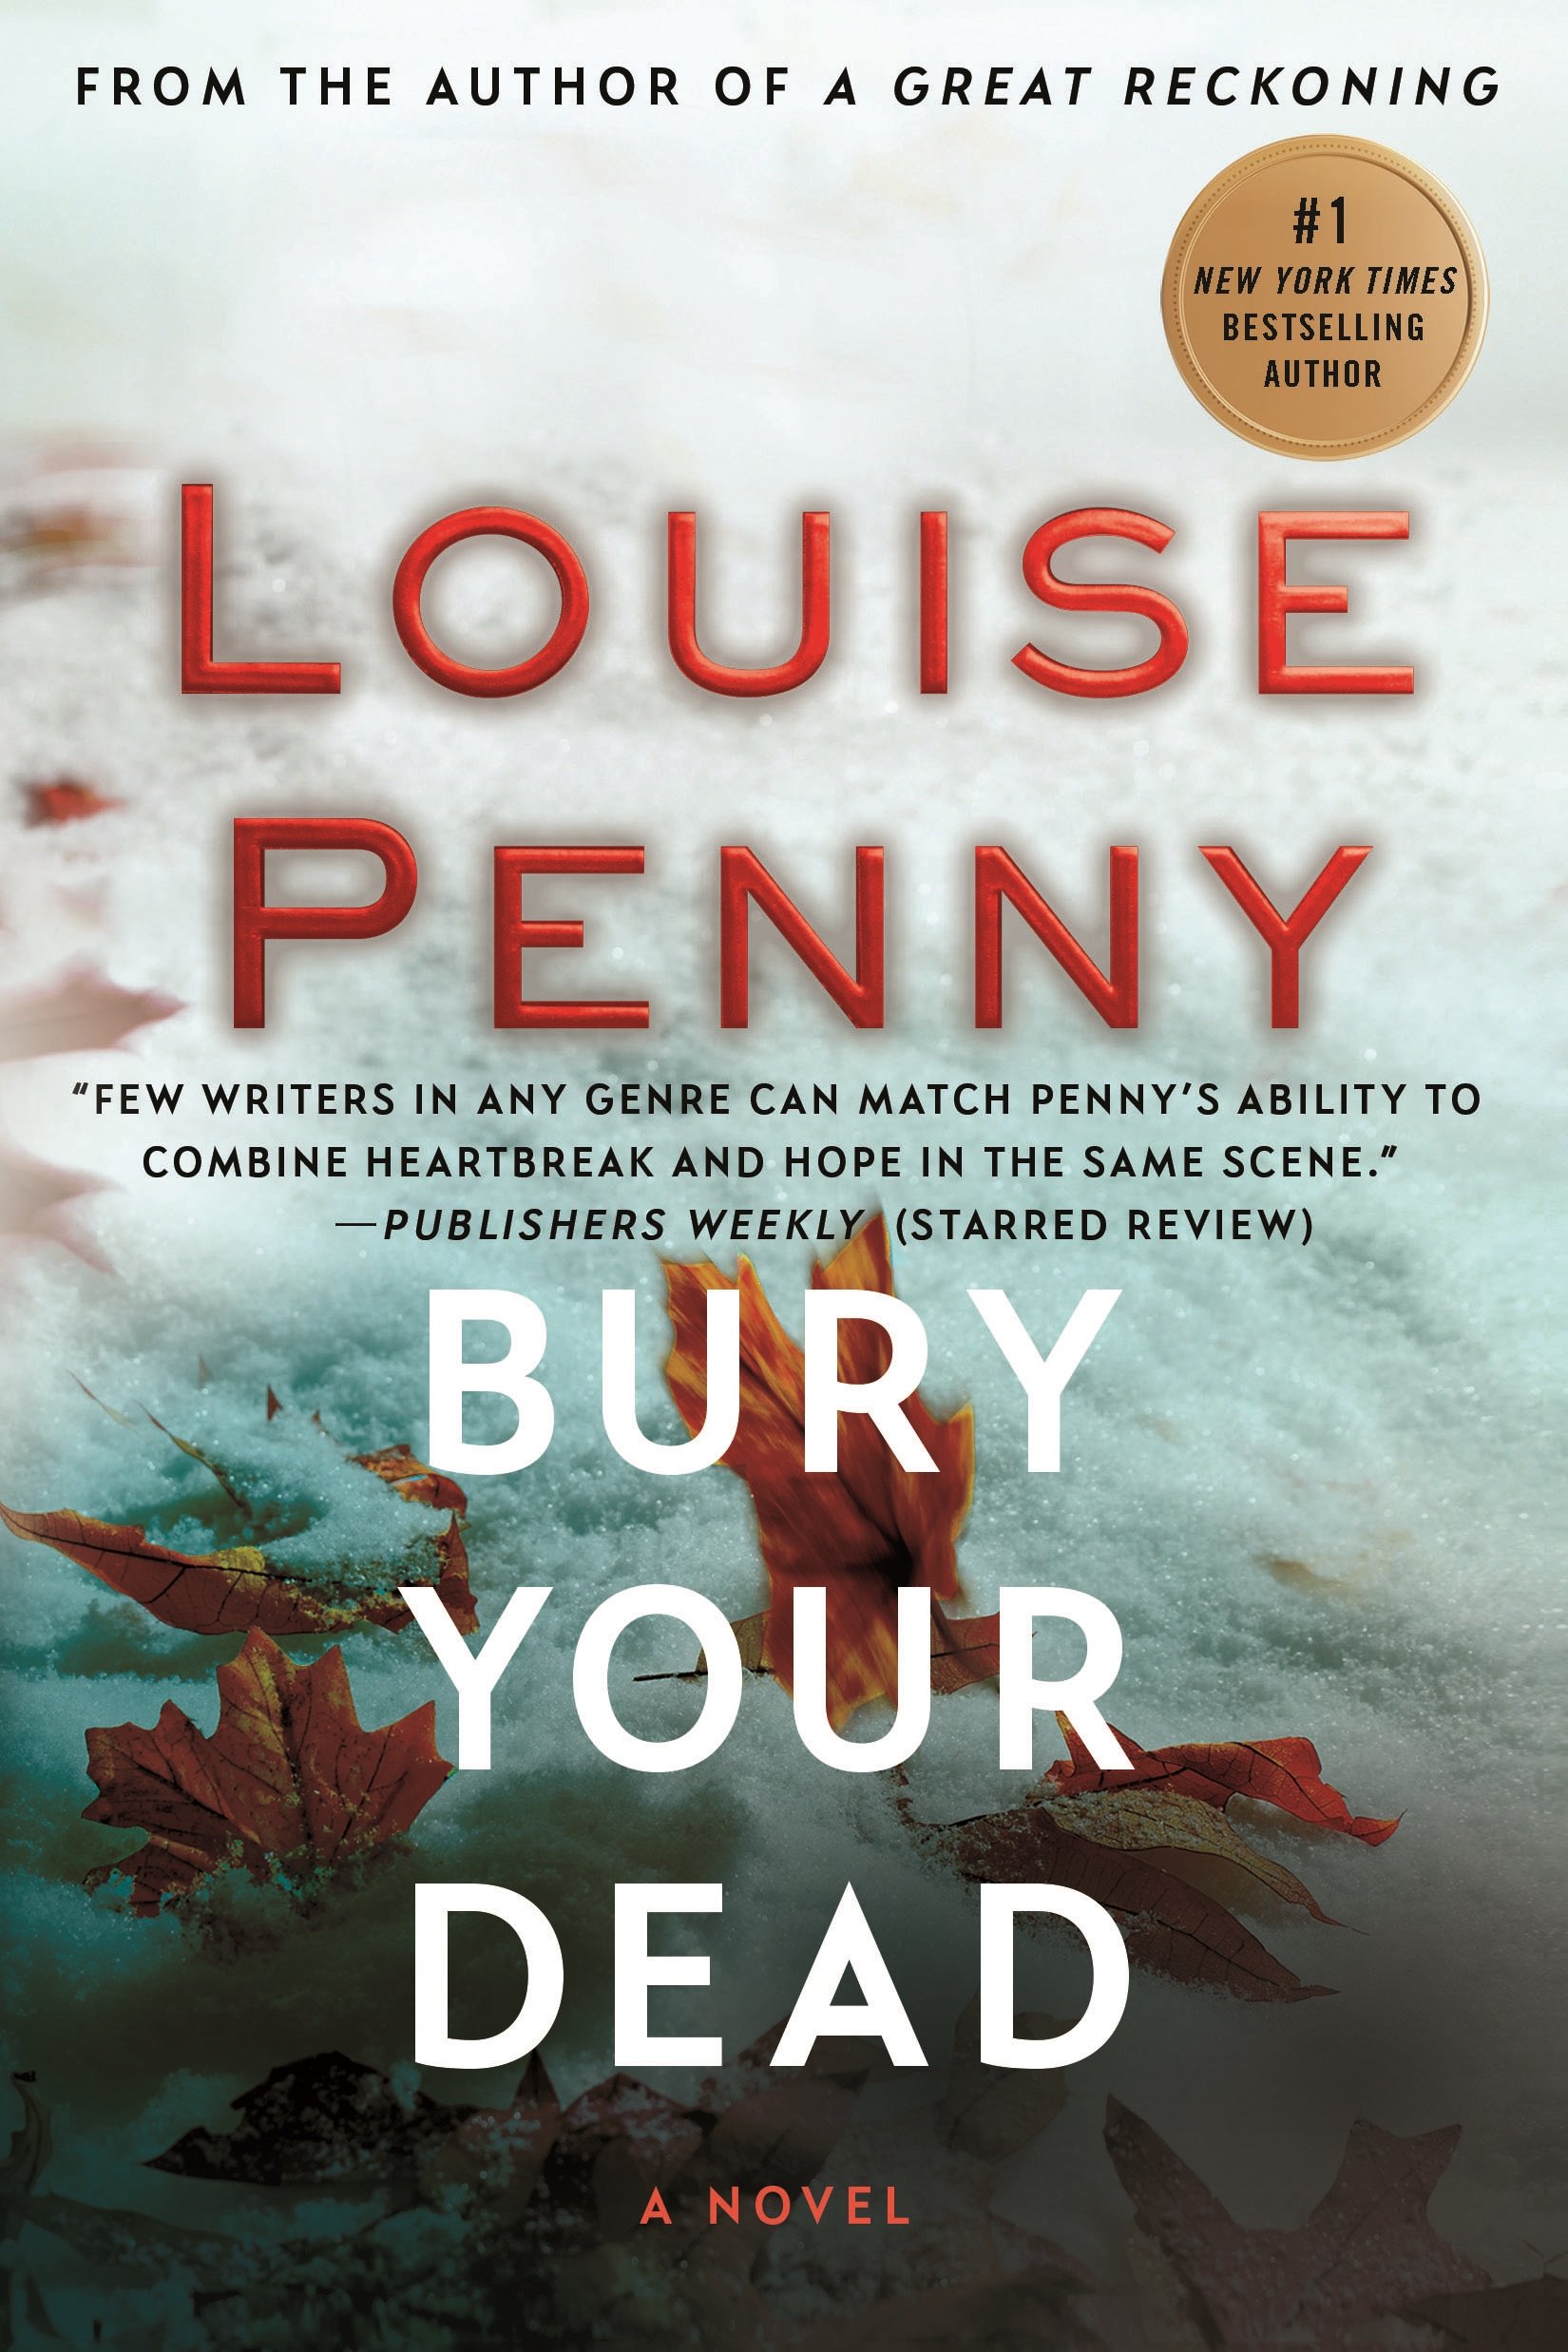 Gamache Is Back in Louise Penny's 'The Long Way Home' - The New York Times